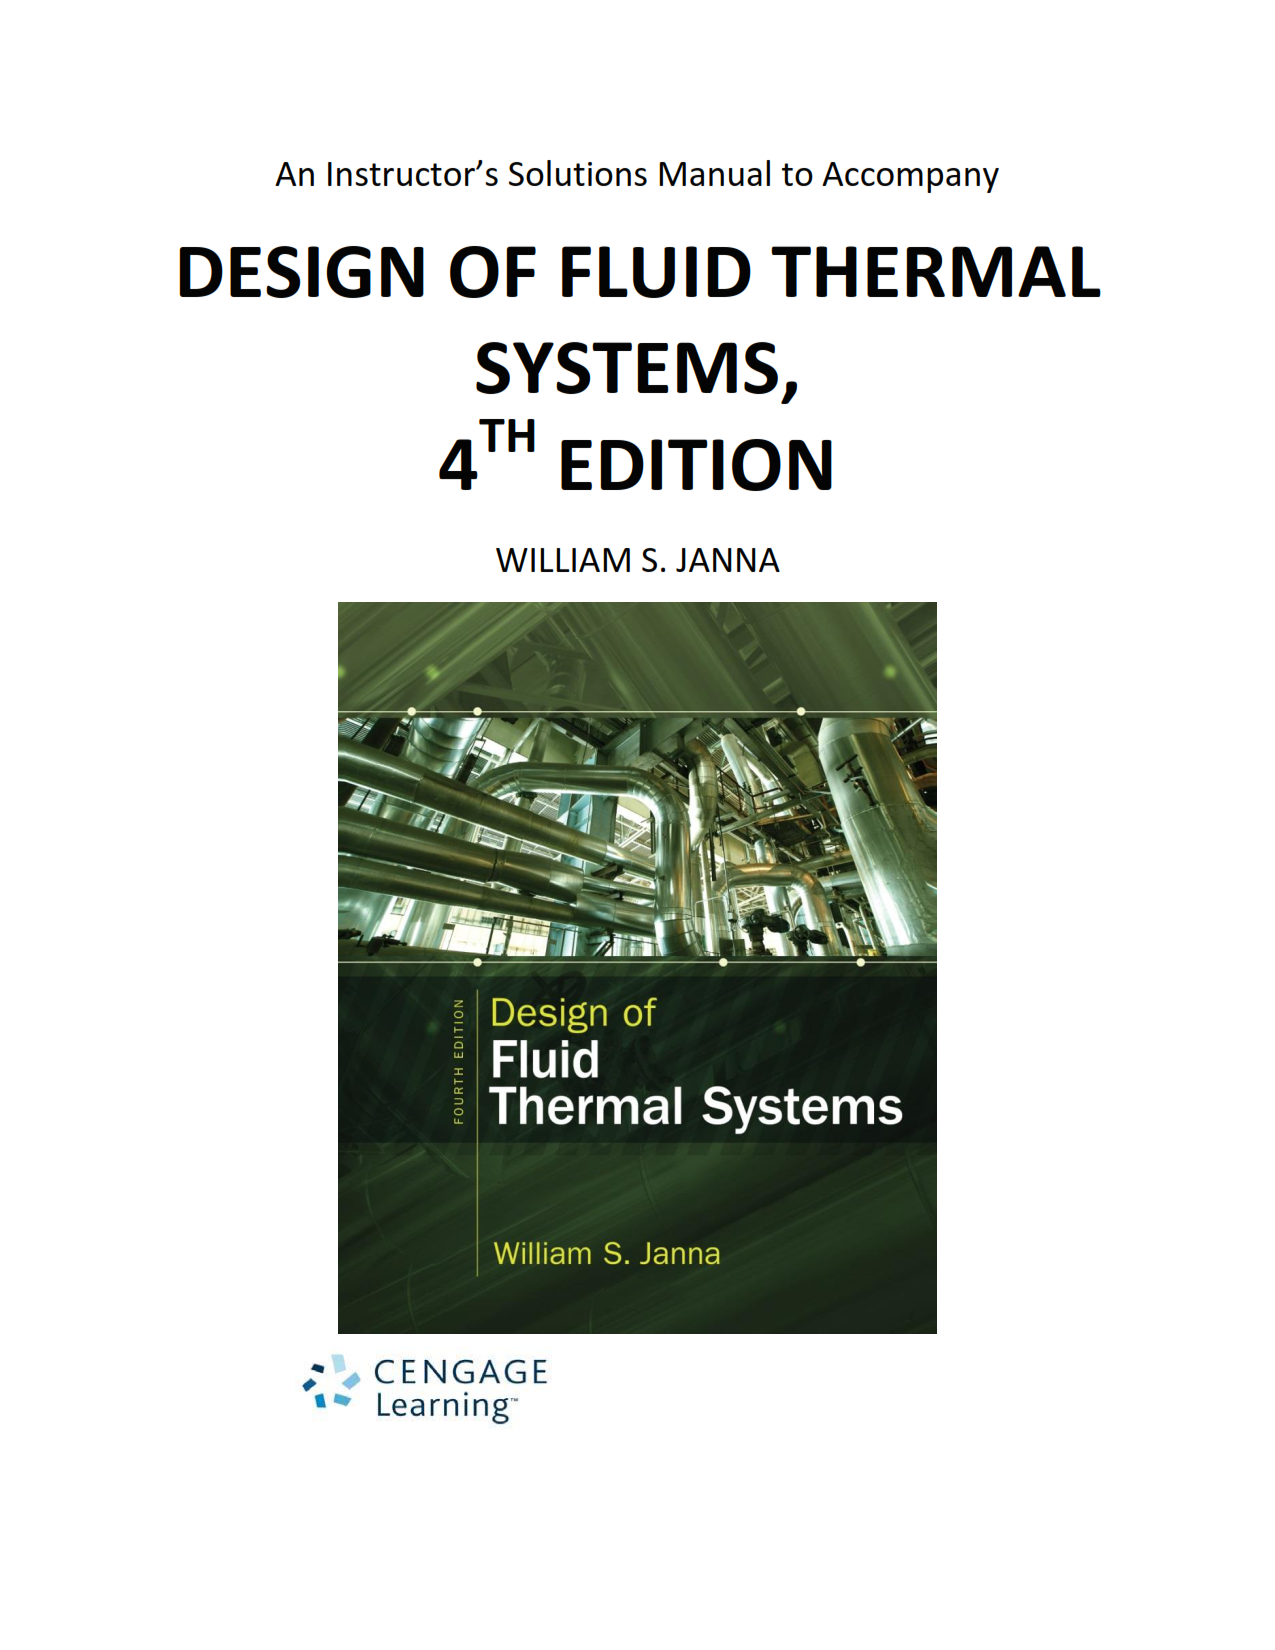 download free Design of fluid thermal systems William Janna 4th edition solution manual pdf | answers and solutions